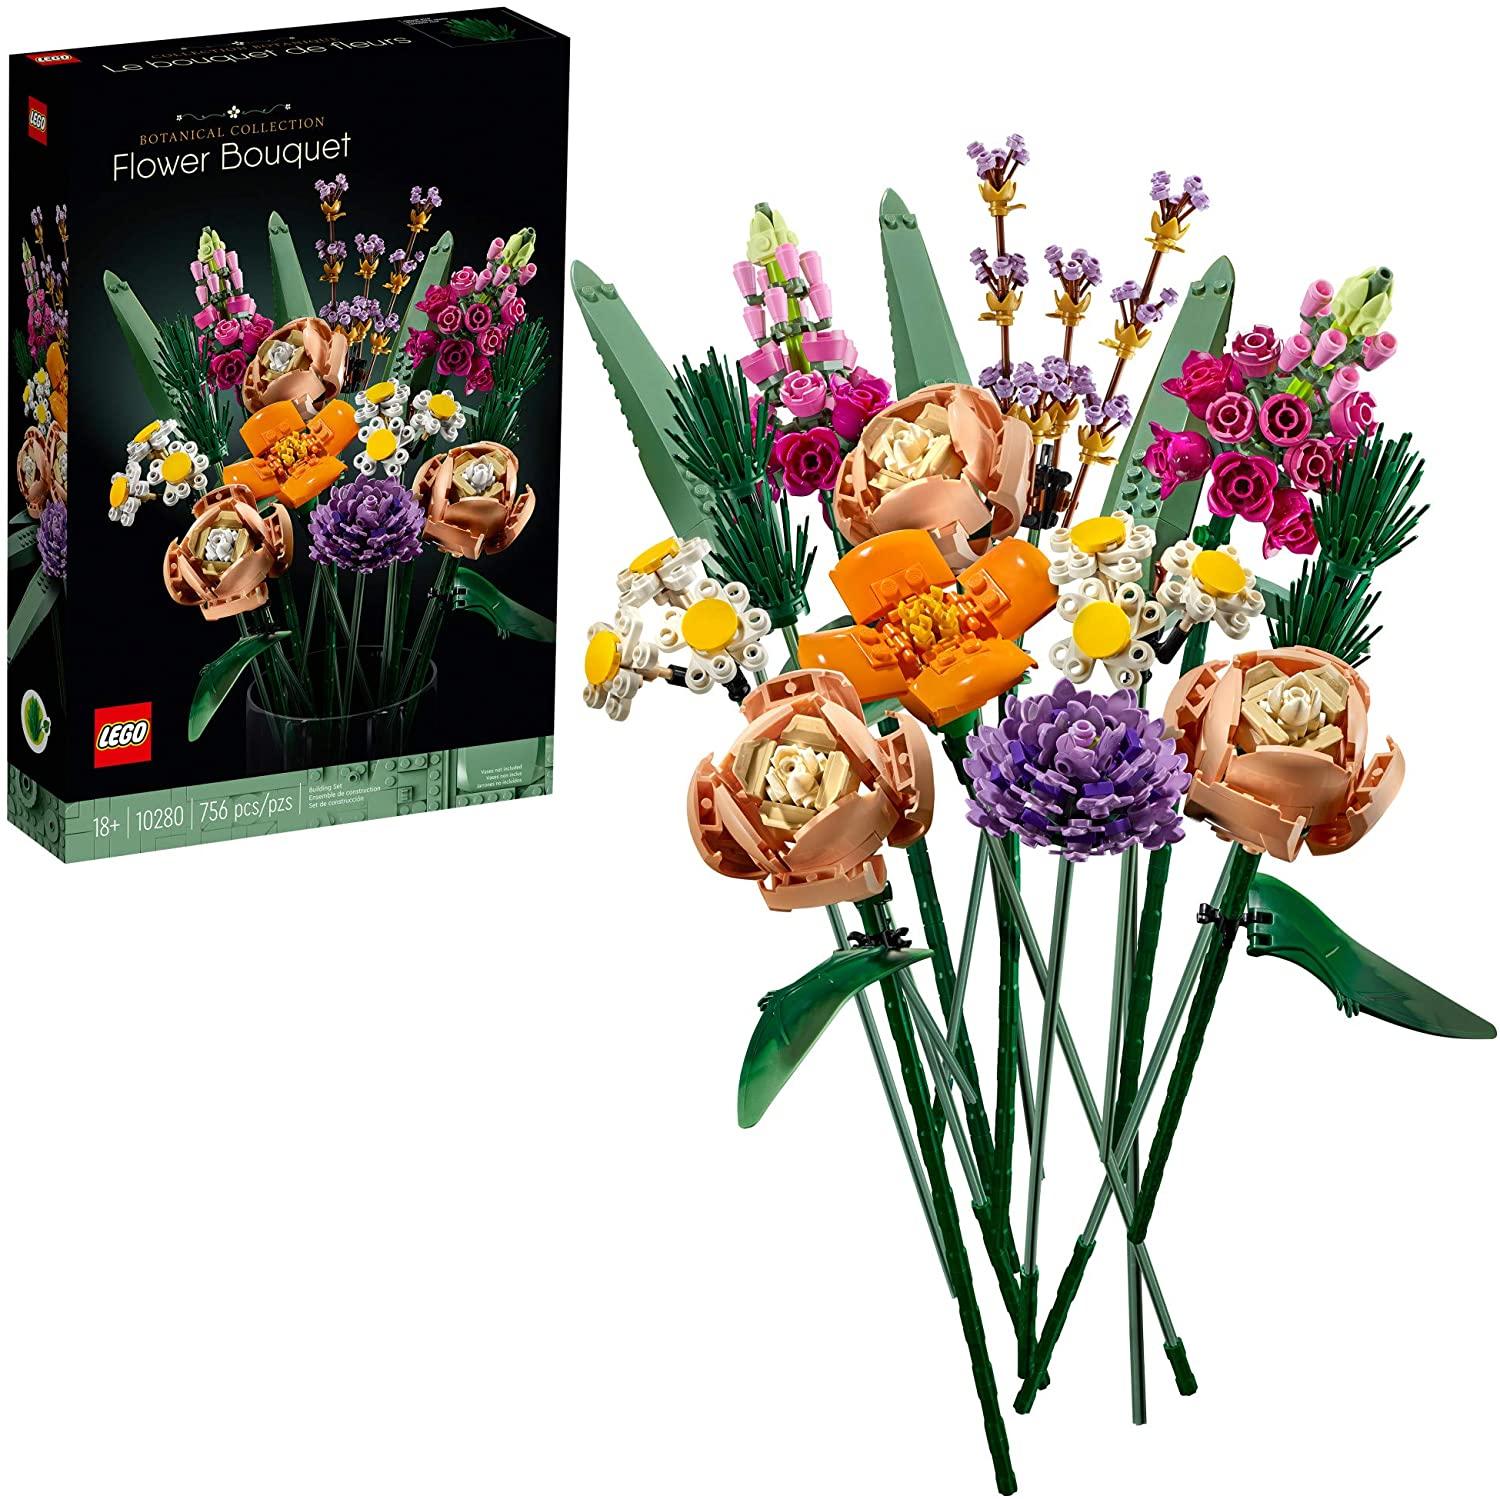 LEGO Flower Bouquet 10280 for $49.99 Shipped